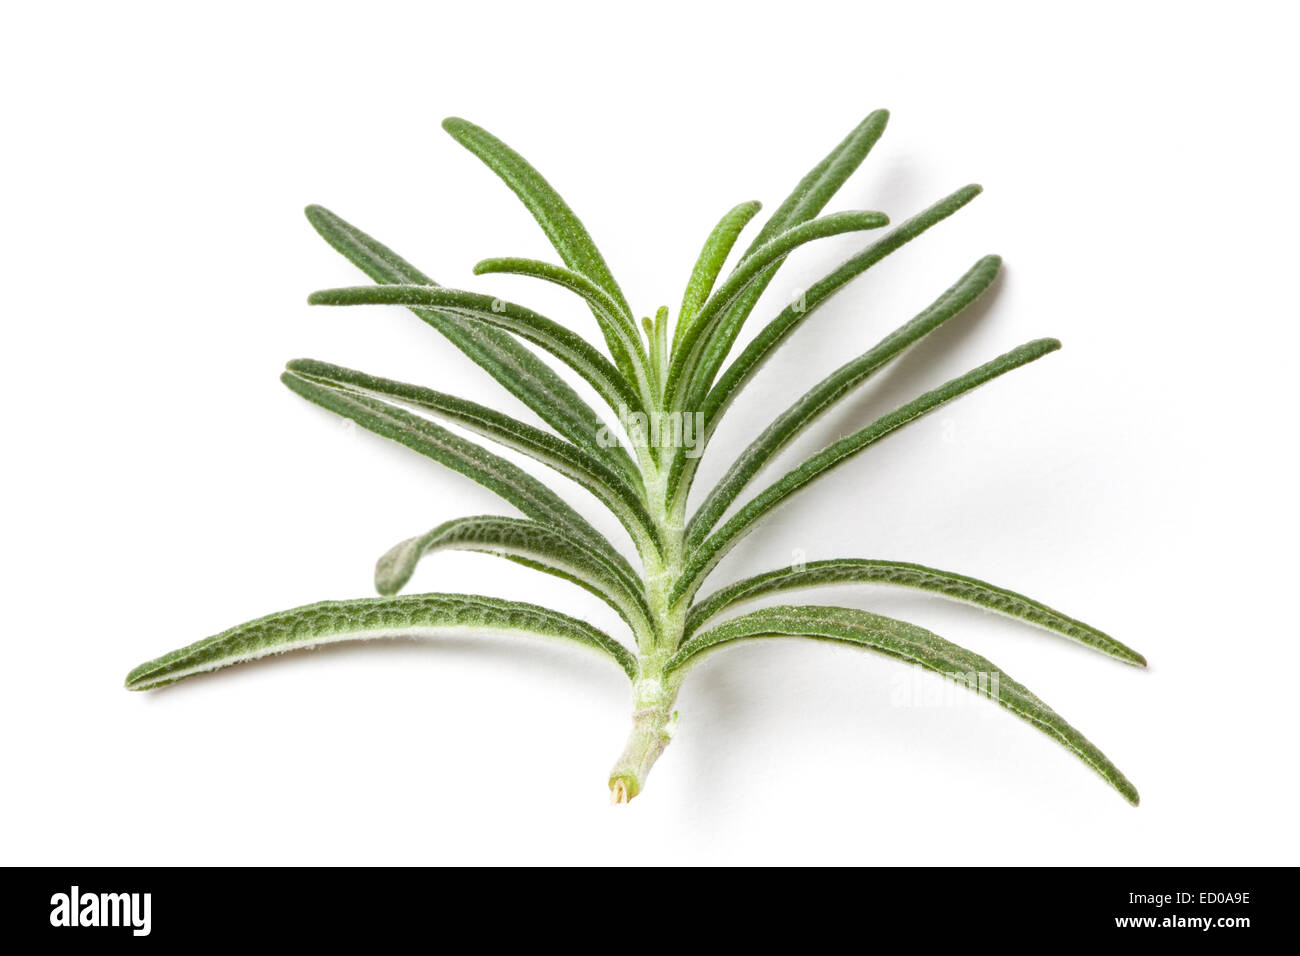 Picture of a rosemary leafs isolated on white Stock Photo